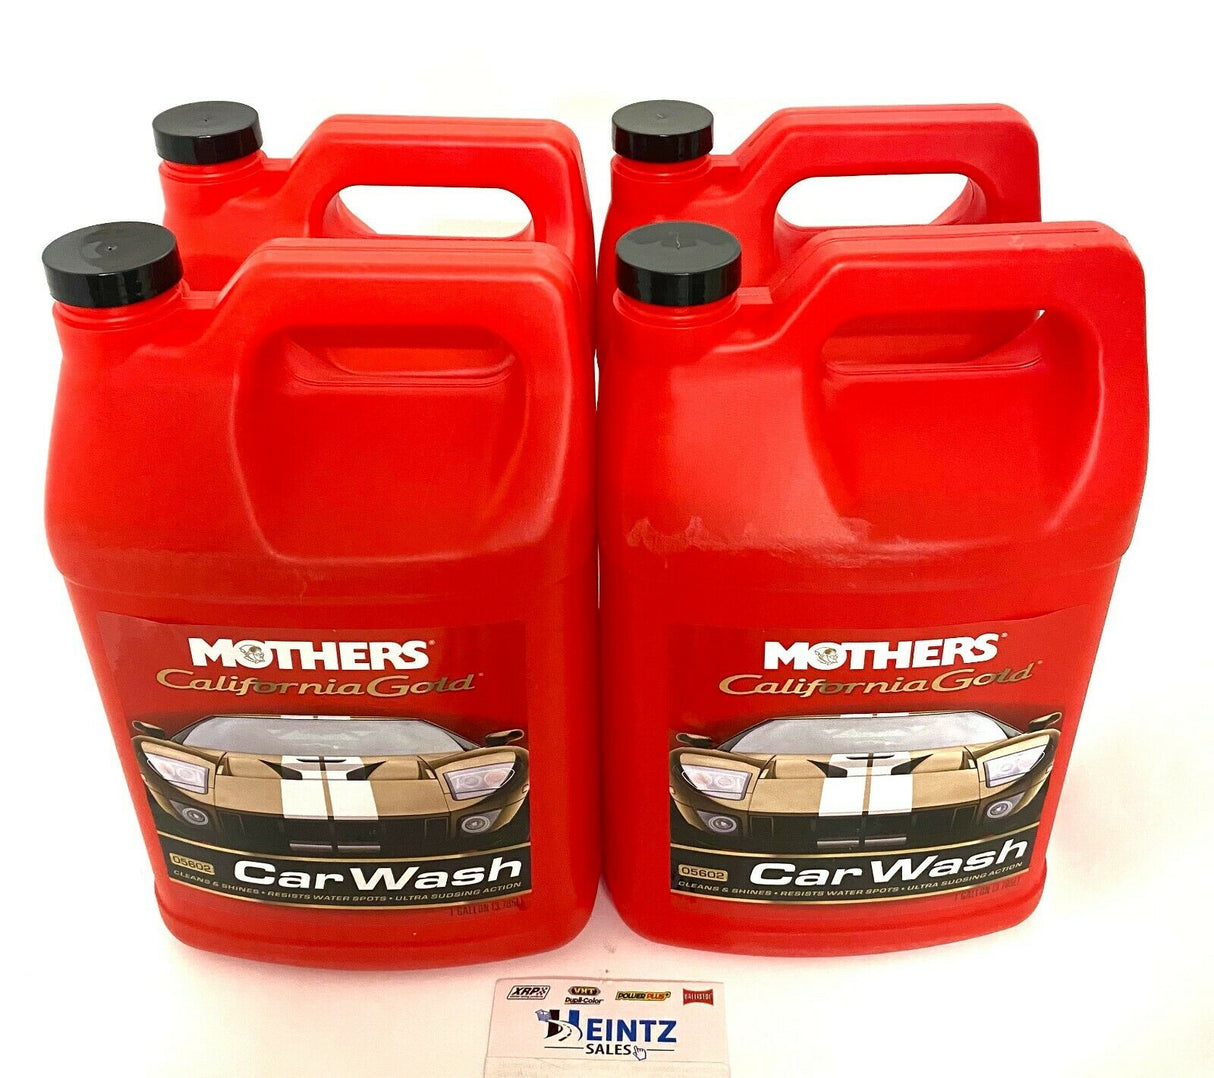 MOTHERS 05602 California Gold Car Wash 4 PACK - Resists water spots - 1 GALLON